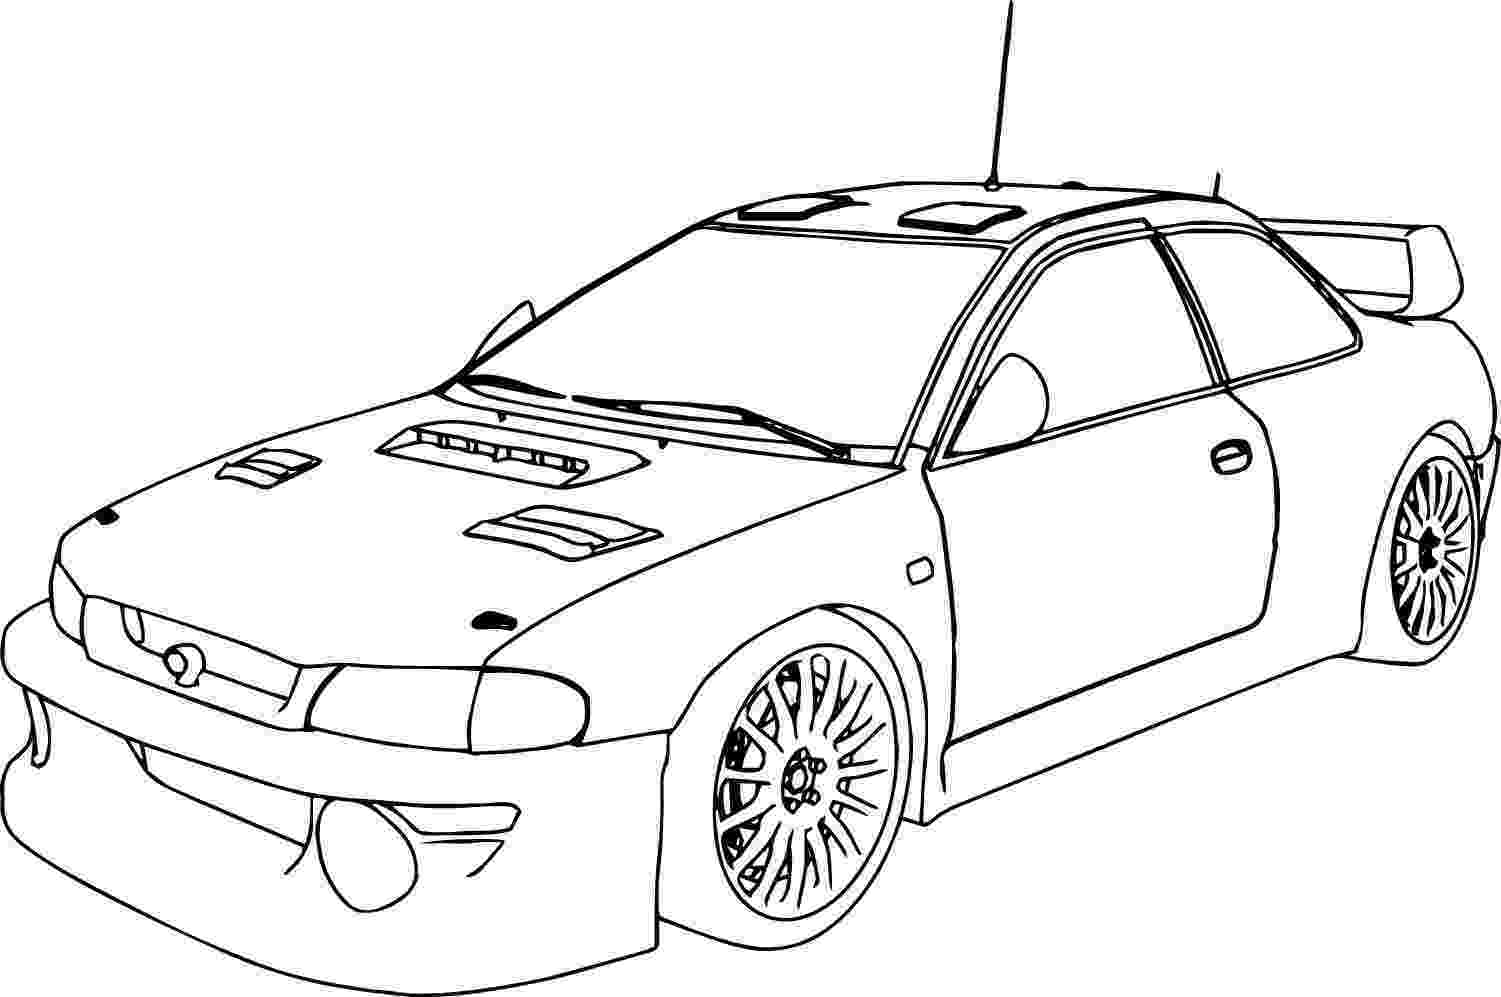 pictures of race cars to color free printable race car coloring pages for kids pictures race cars of color to 